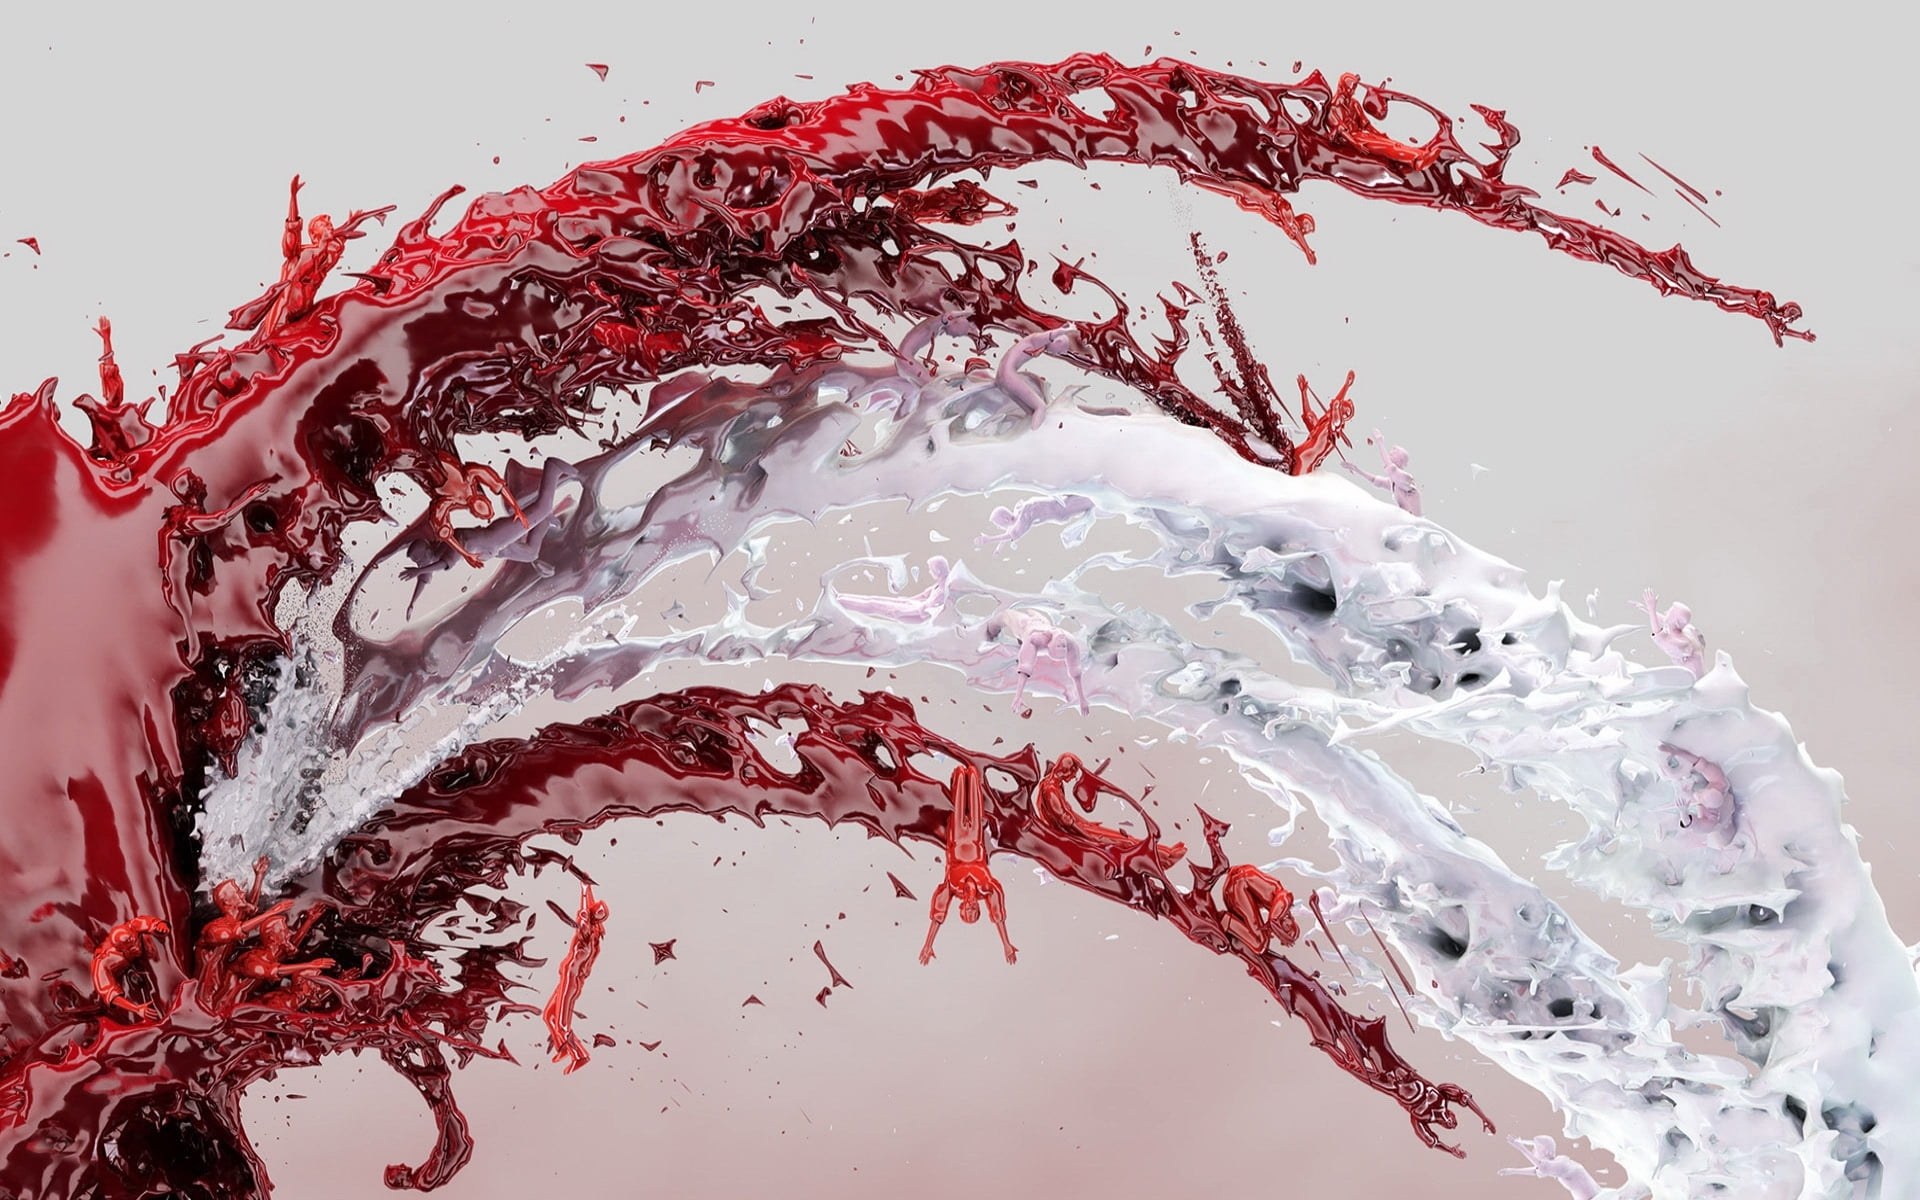 selective focus of water and blood mixing